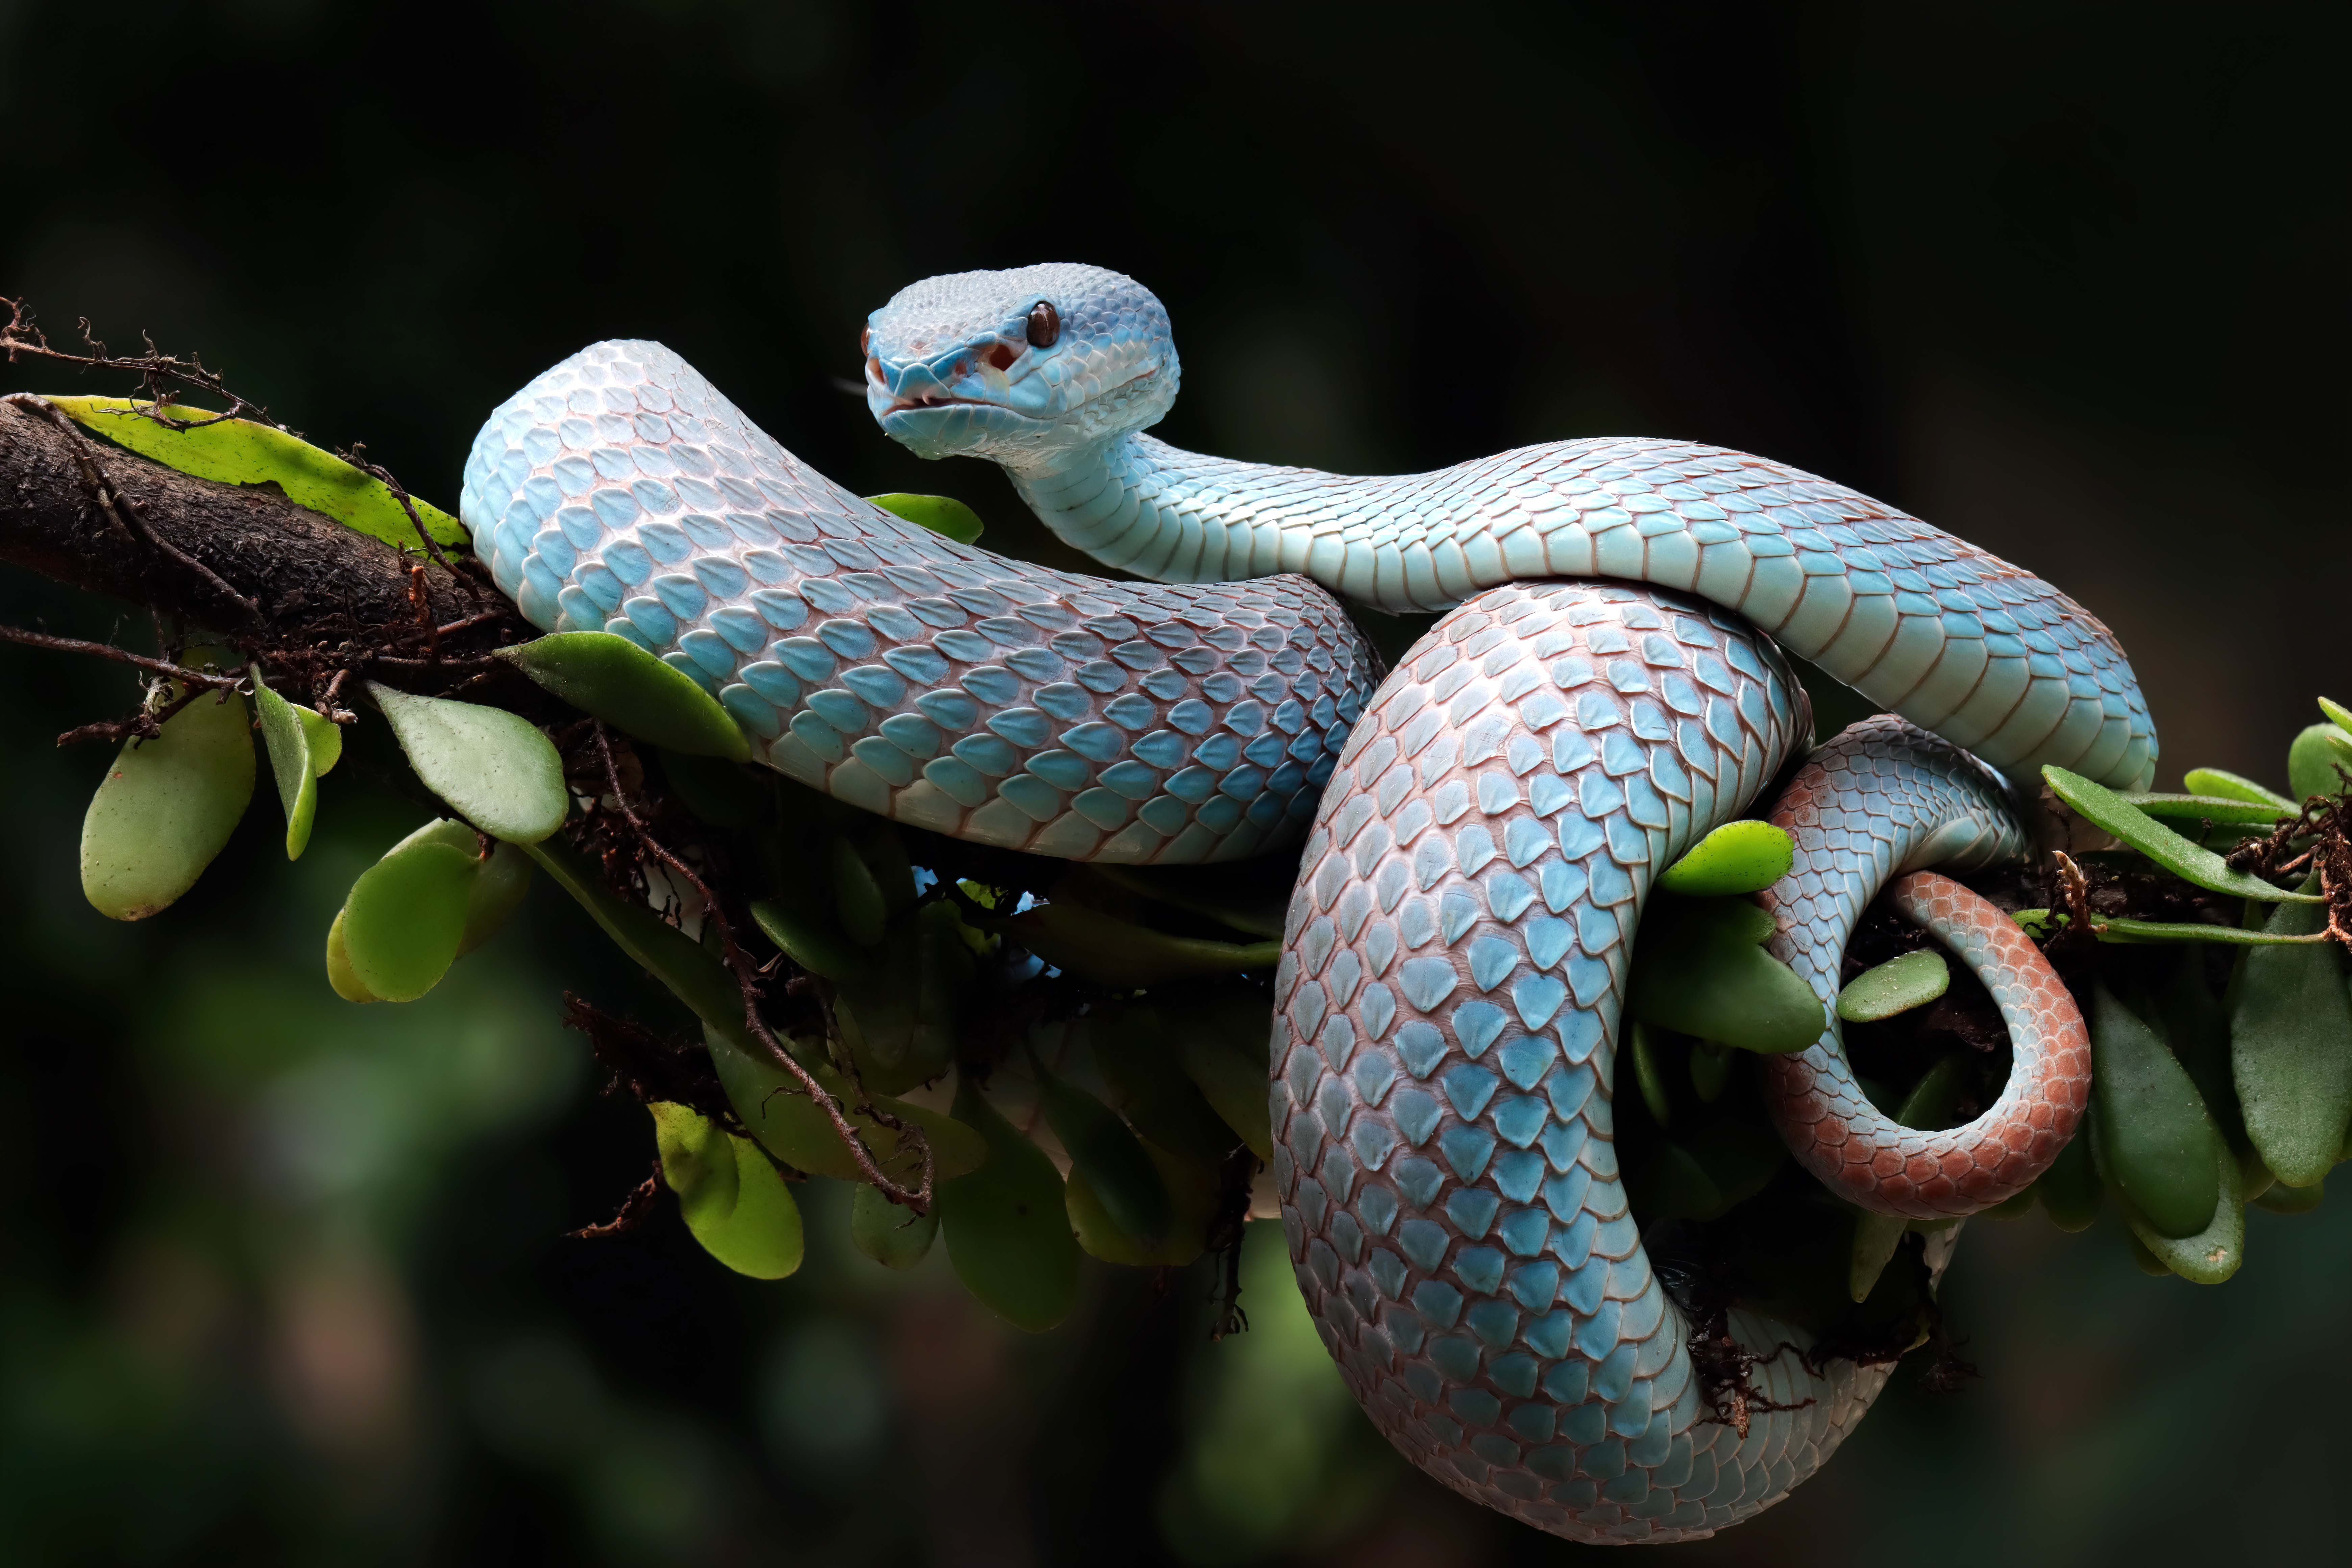 Animals Reptilien Ball Pythons Python Of Bruma Colored Snake With Yellow  And White 4k Ultra Hd Tv Wallpaper For Desktop Laptop Tablet And Mobile  Phones 3840x2400 : Wallpapers13.com